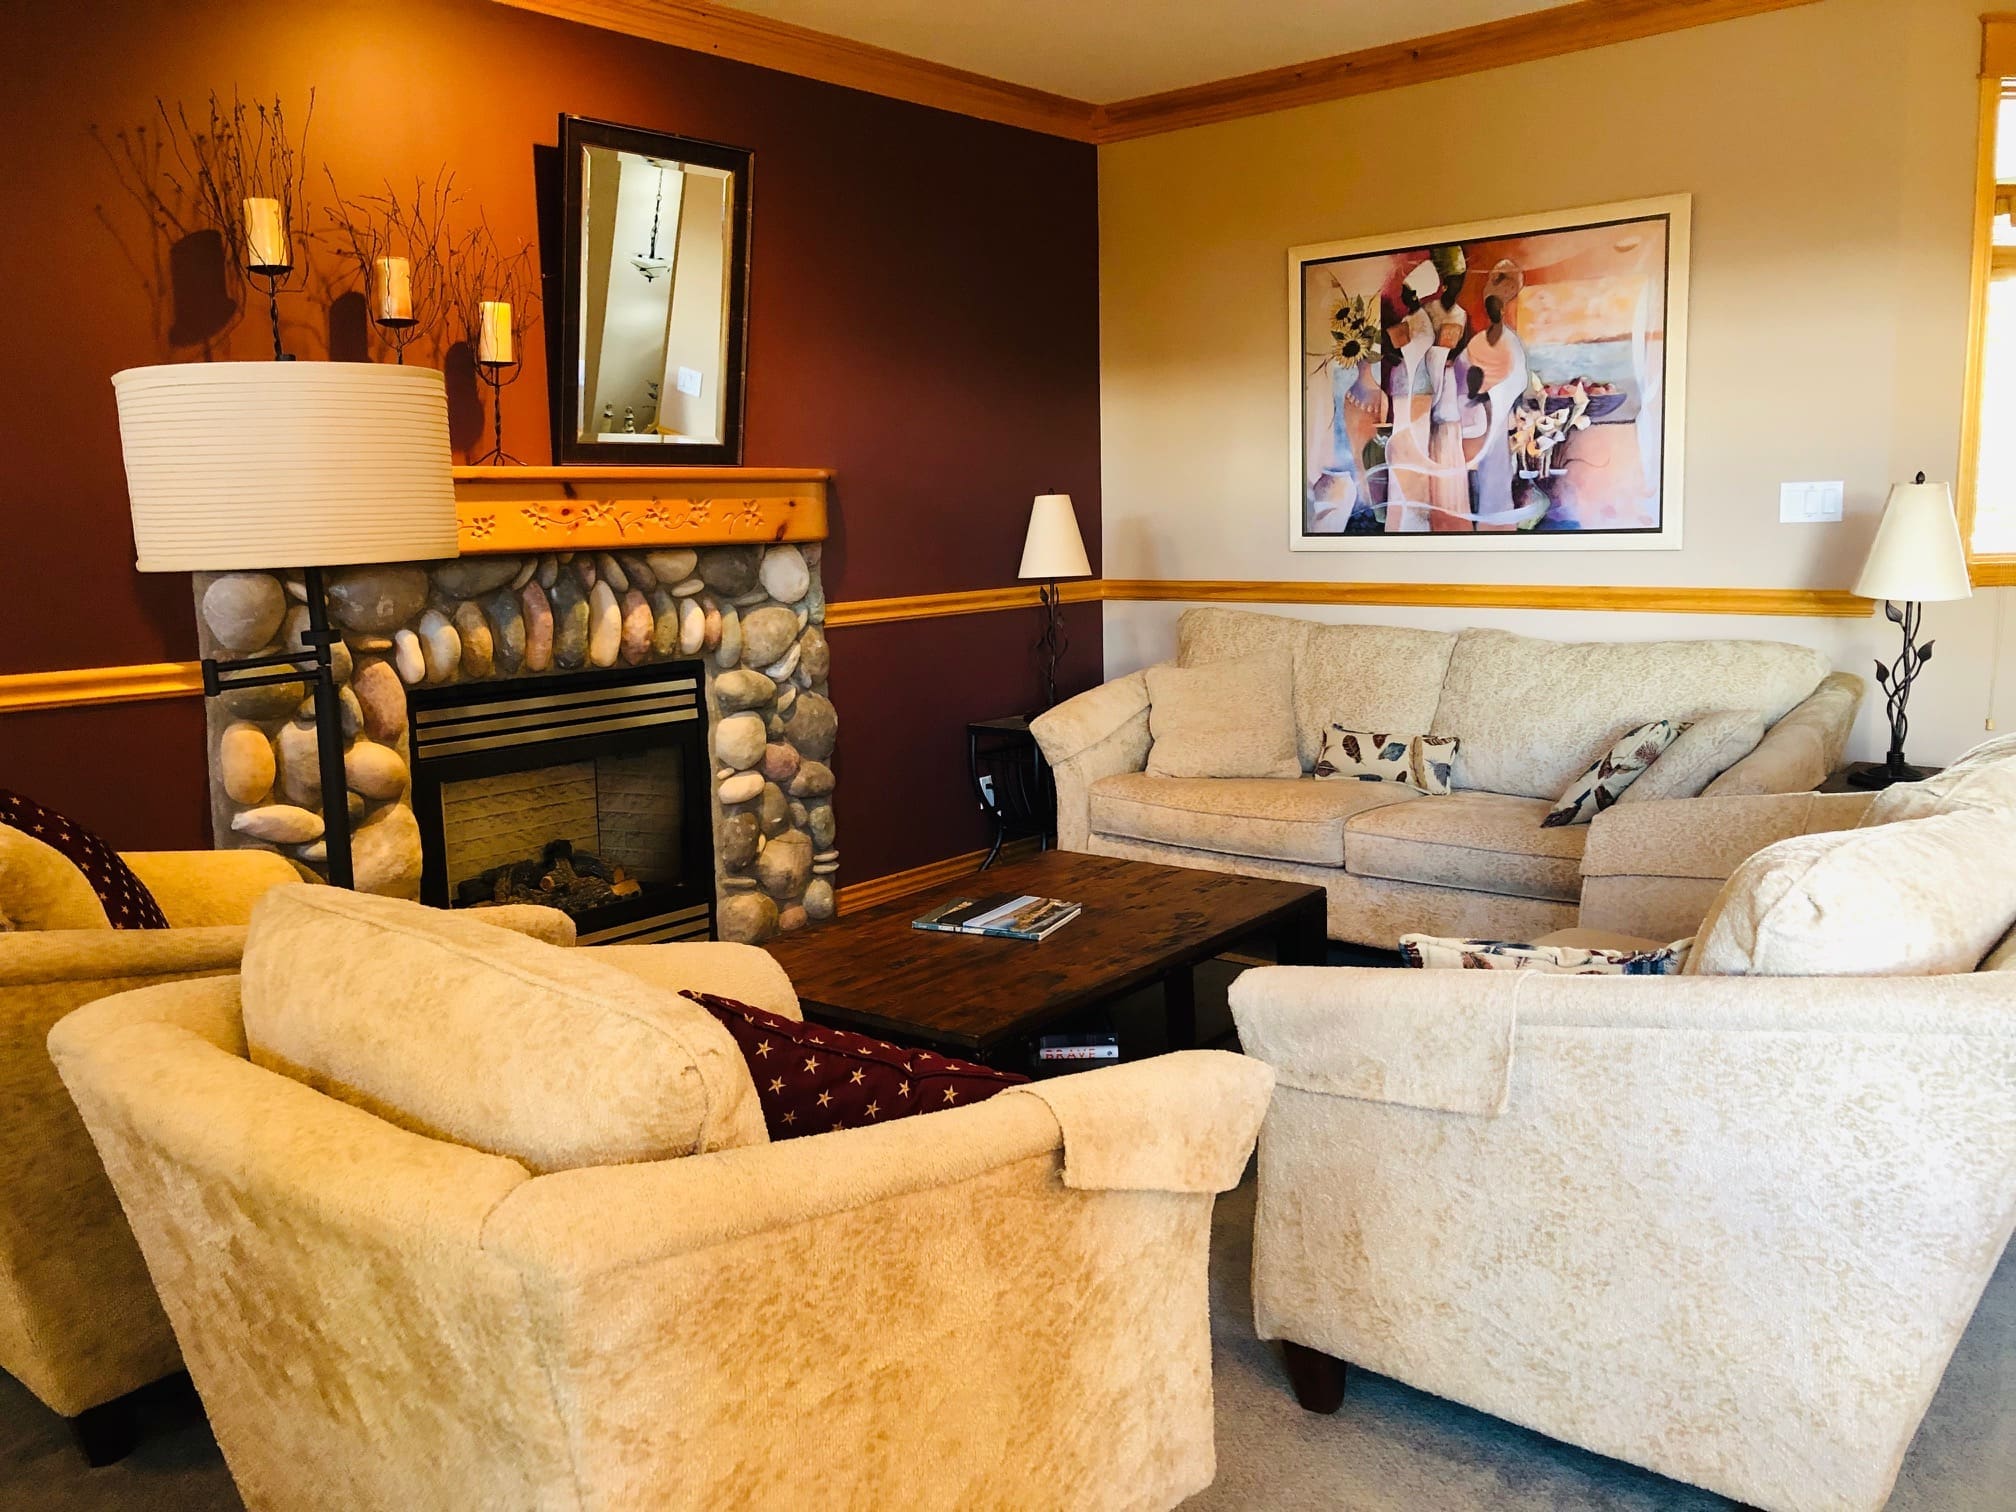 Living room of townhouse with gas fireplace, dining area, fully stocked kitchen and pantry. Also has an outdoor deck with BBQ and private hot tub. Private laundry and garage for storage/parking.